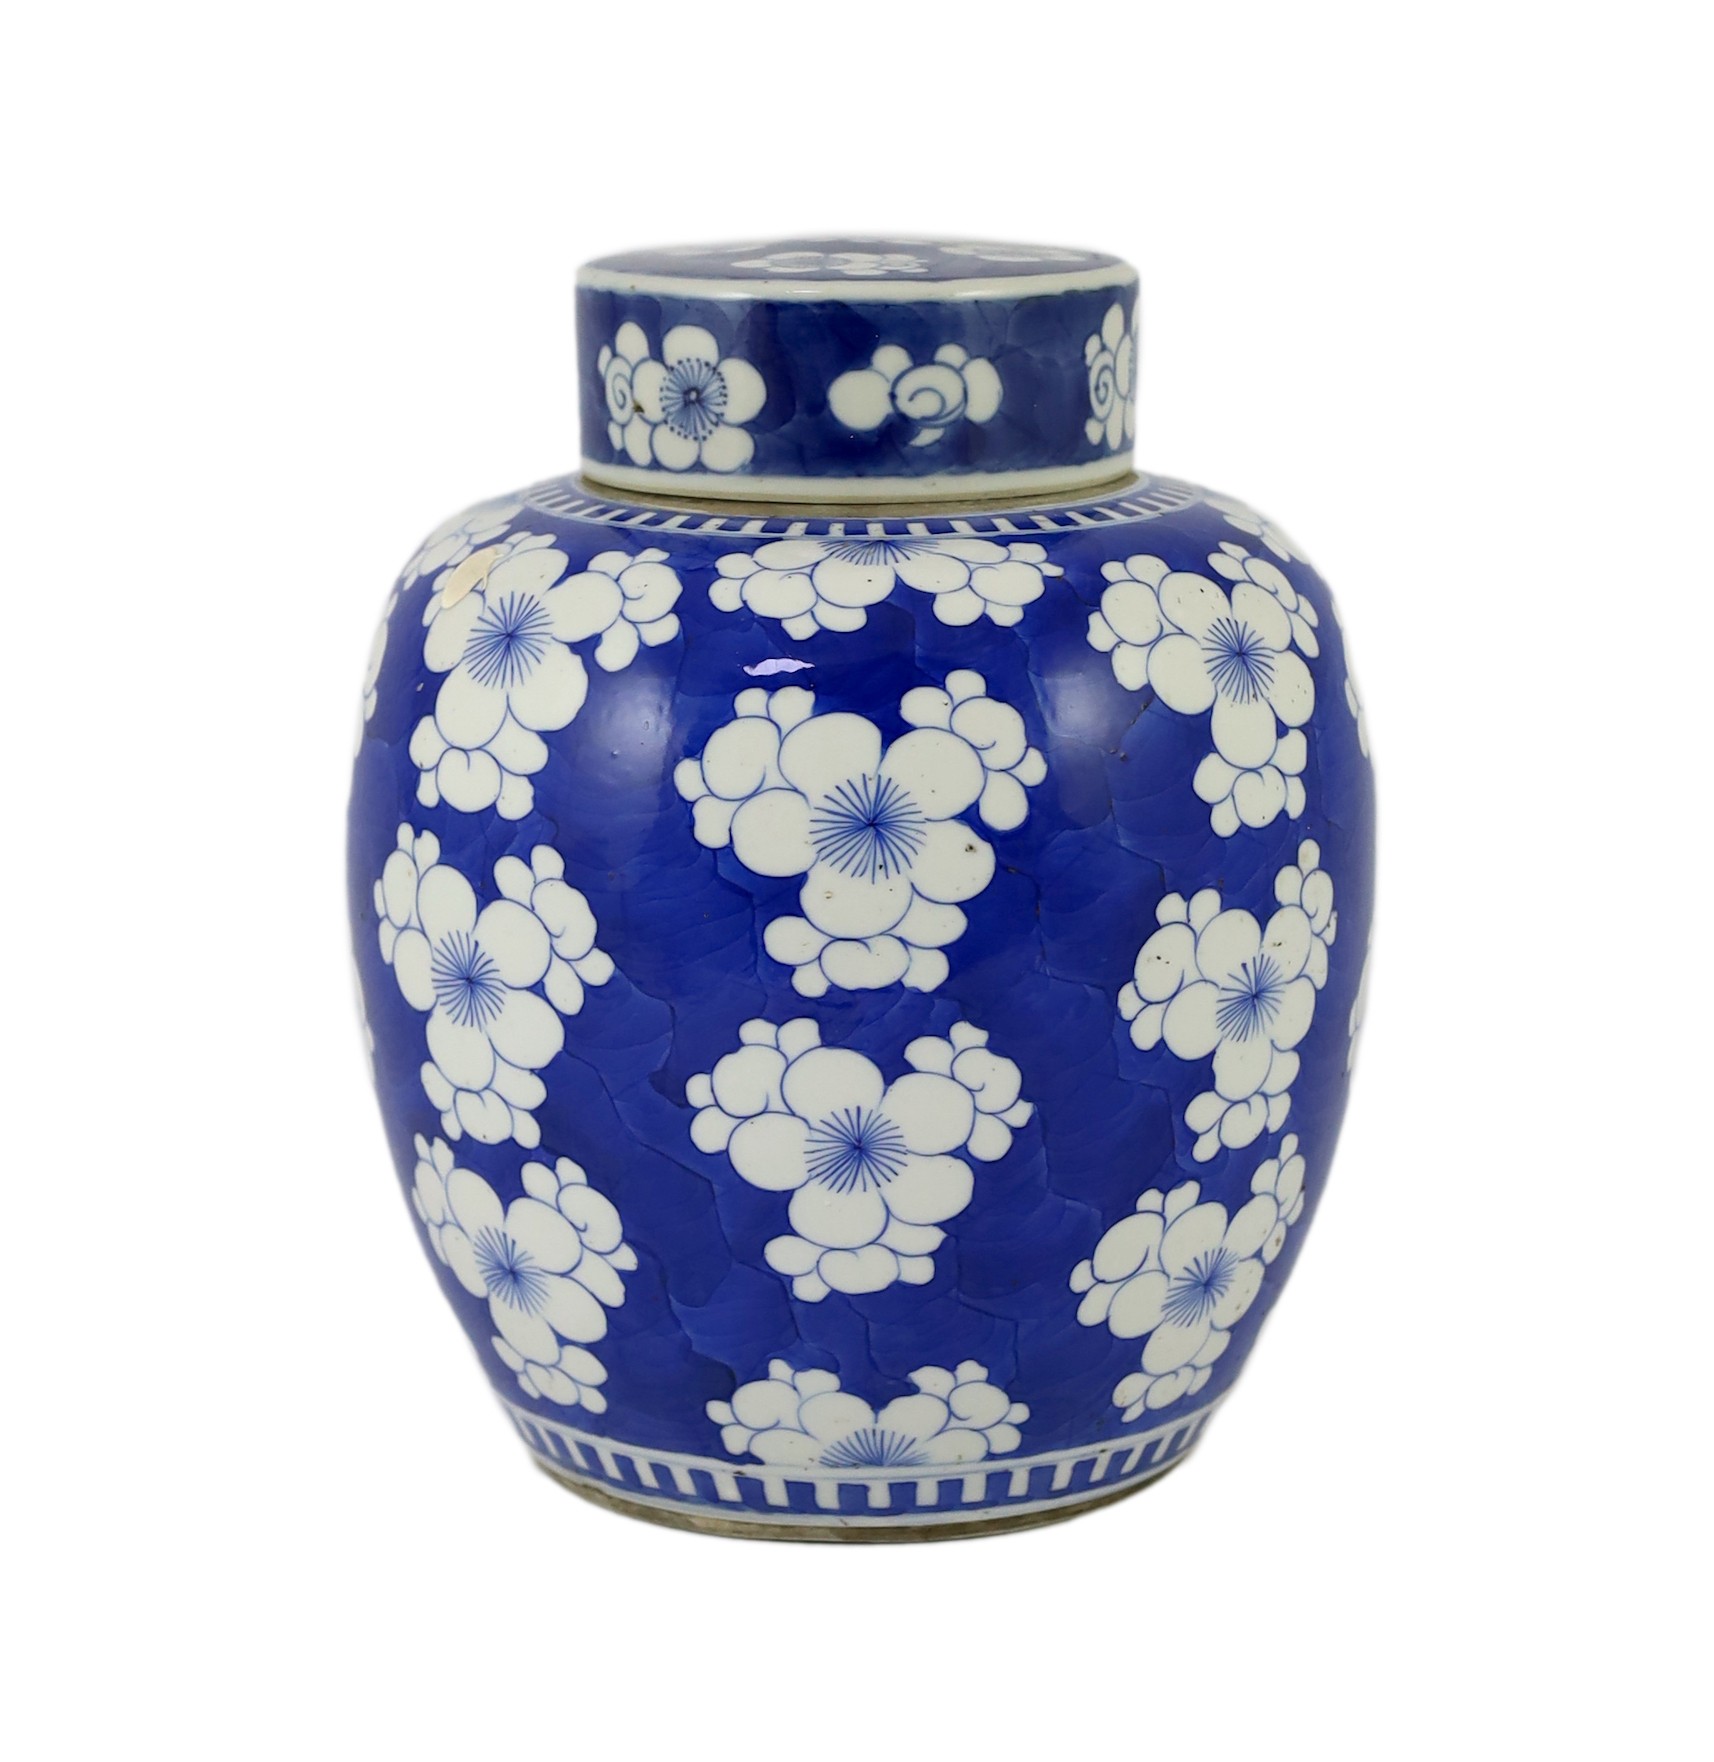 A Chinese blue and white prunus jar and cover, 19th century, 25cm high, cover associated